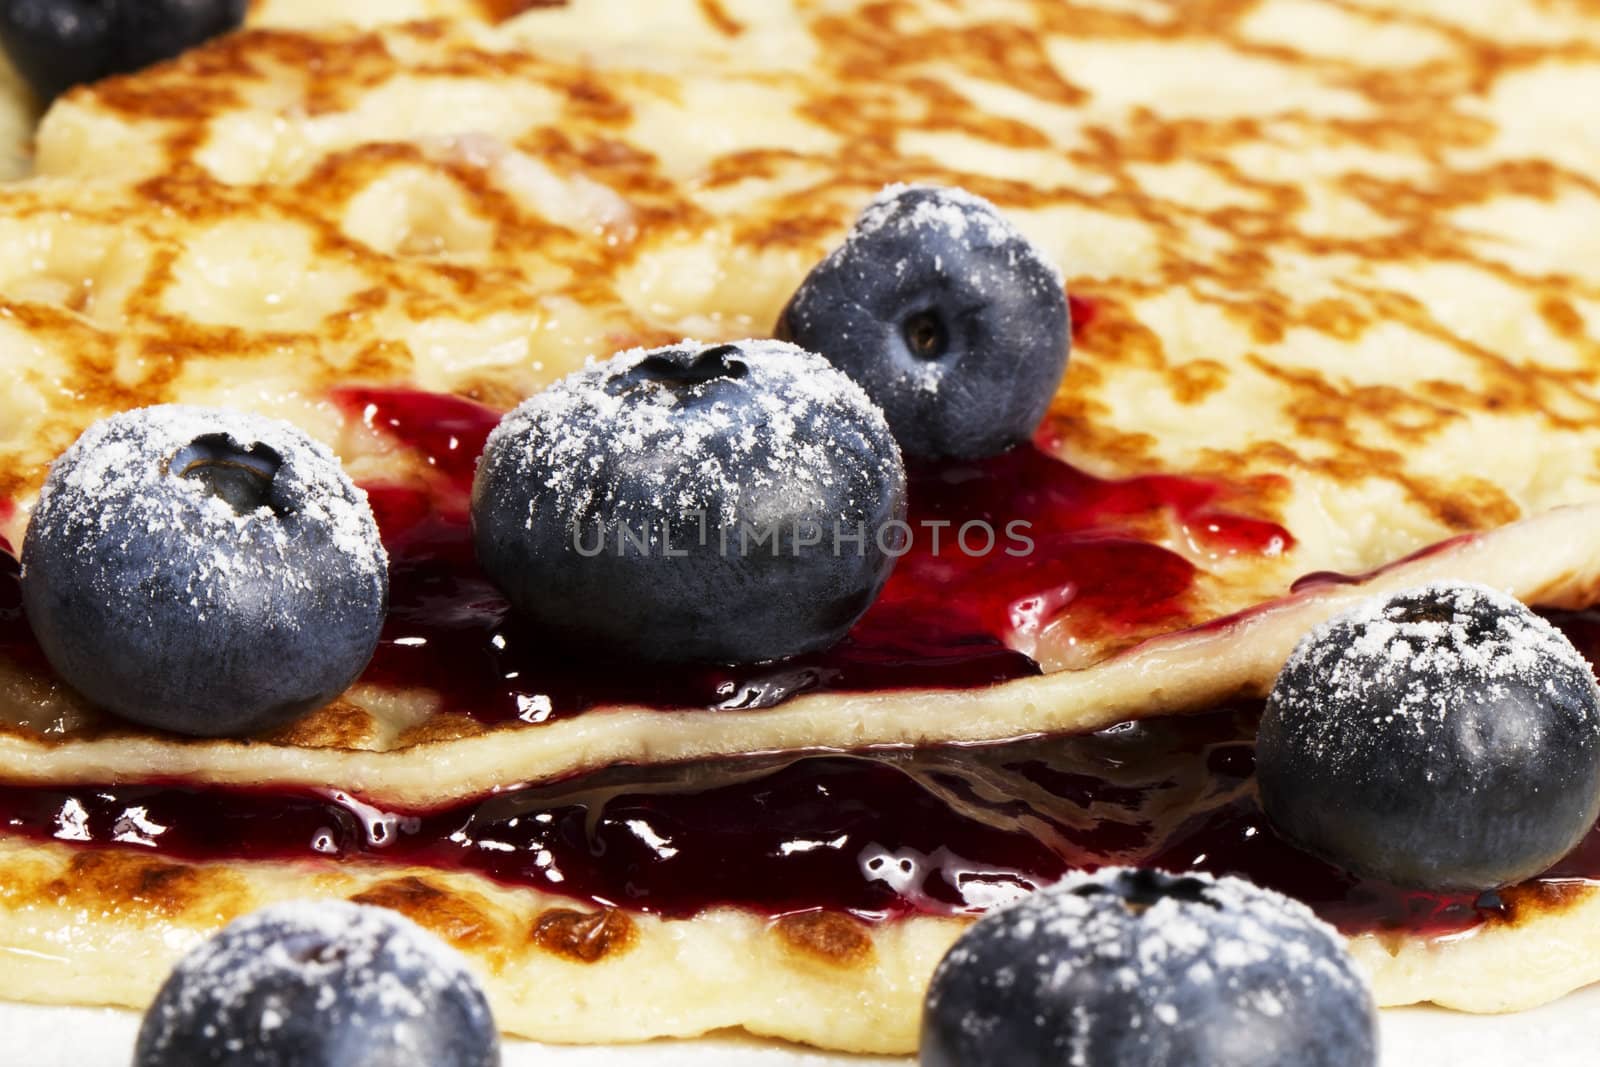 closeup of sugar covered blueberries with jam on pancakes